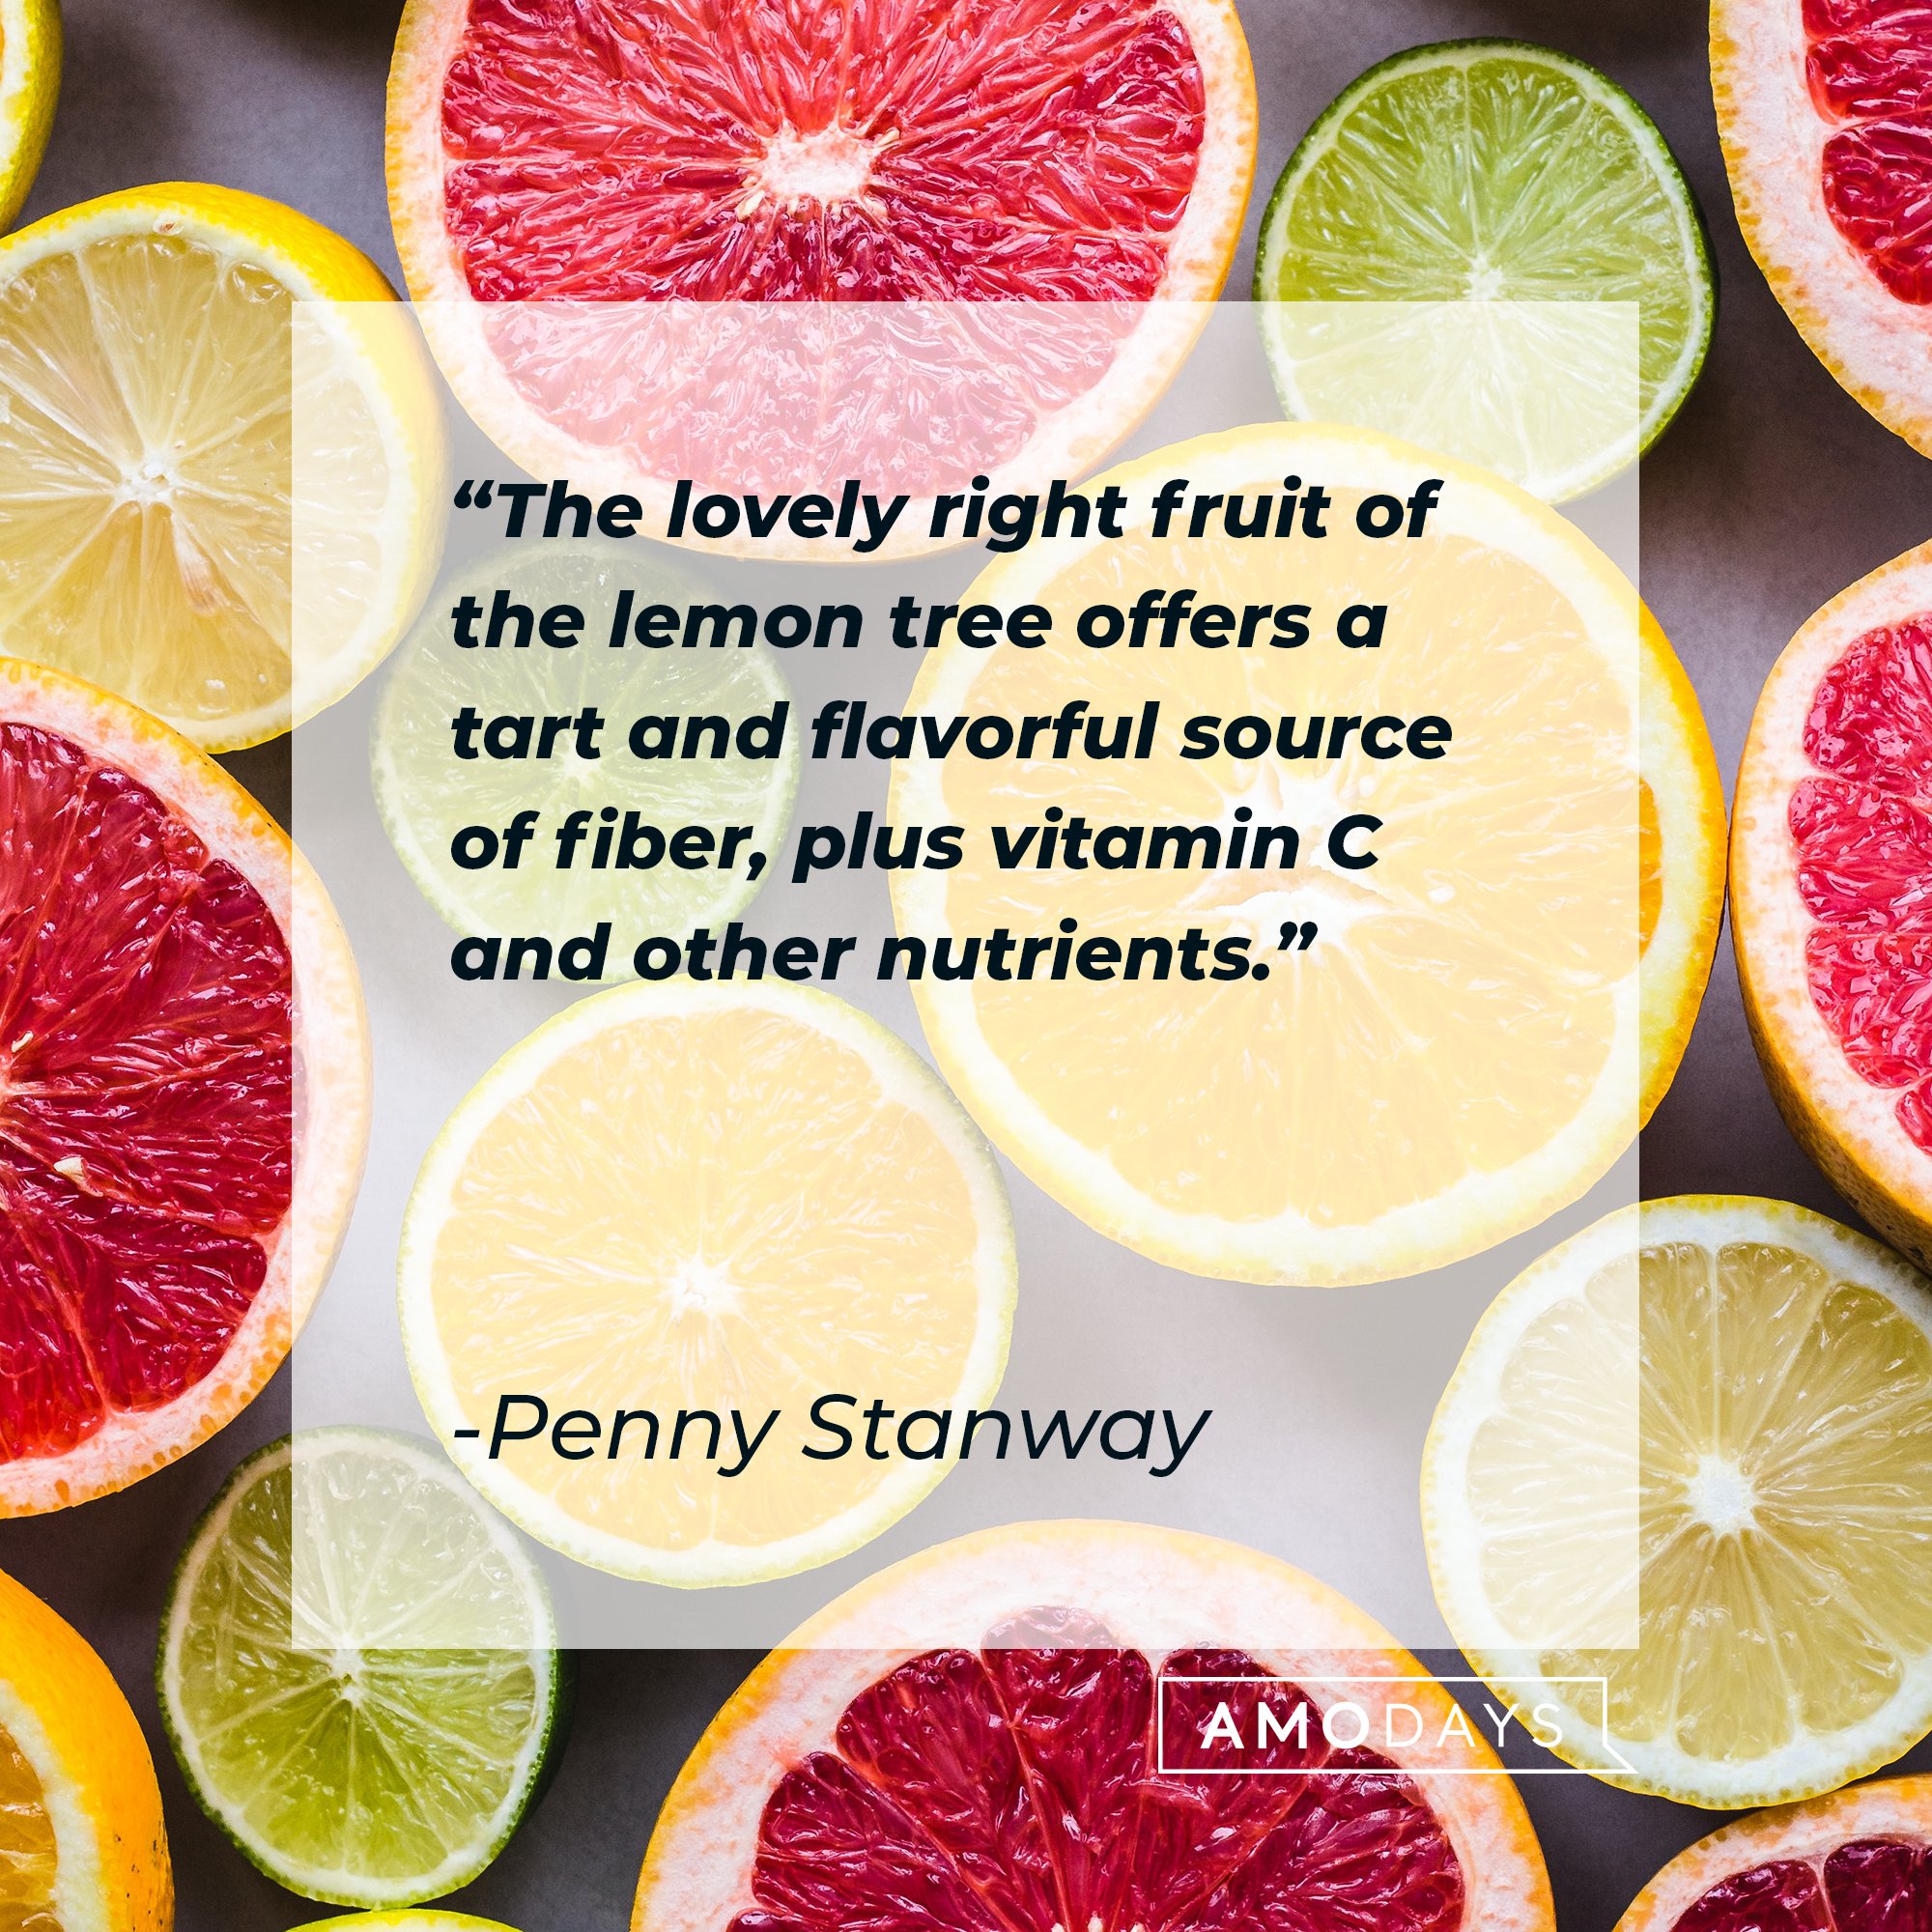 Penny Stanway’s quote: "The lovely right fruit of the lemon tree offers a tart and flavorful source of fiber, plus vitamin C and other nutrients." | Image: AmoDays 